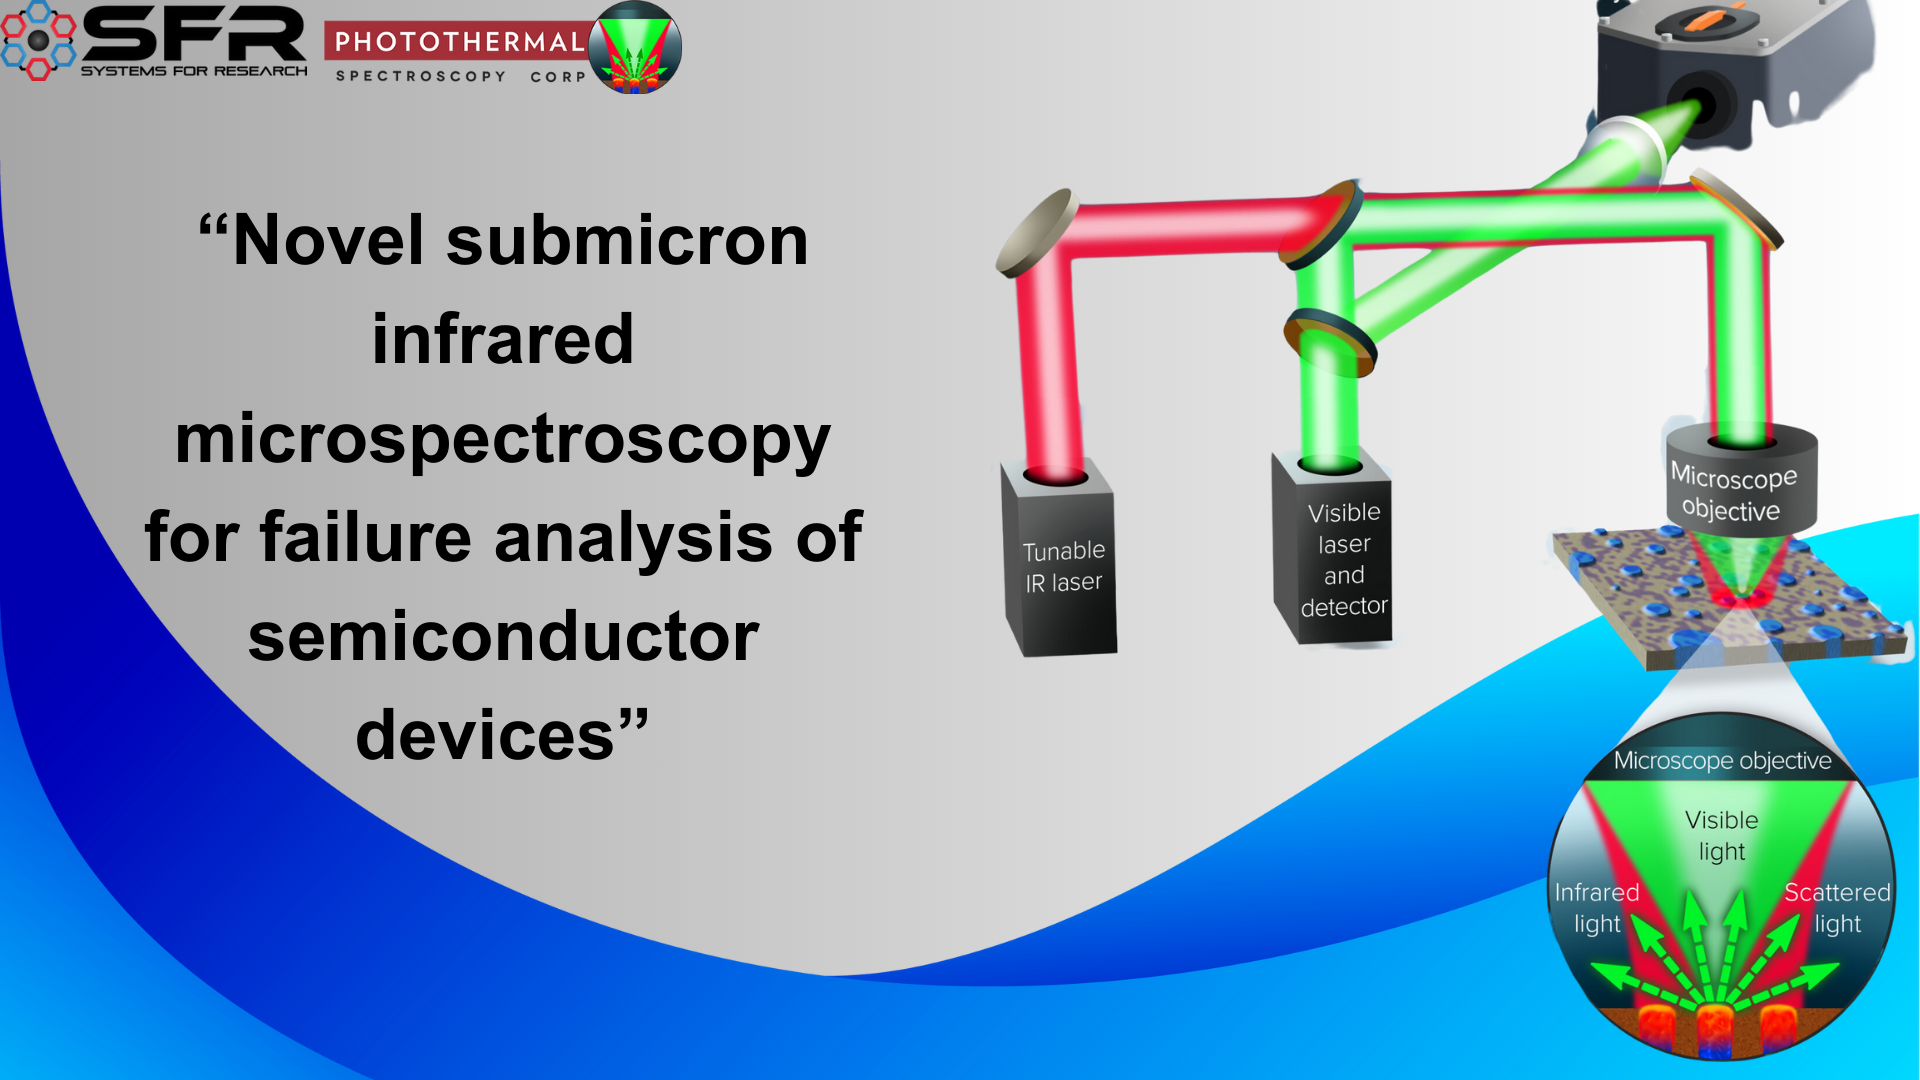 Novel submicron infrared microspectroscopy for failure analysis of semiconductor devices